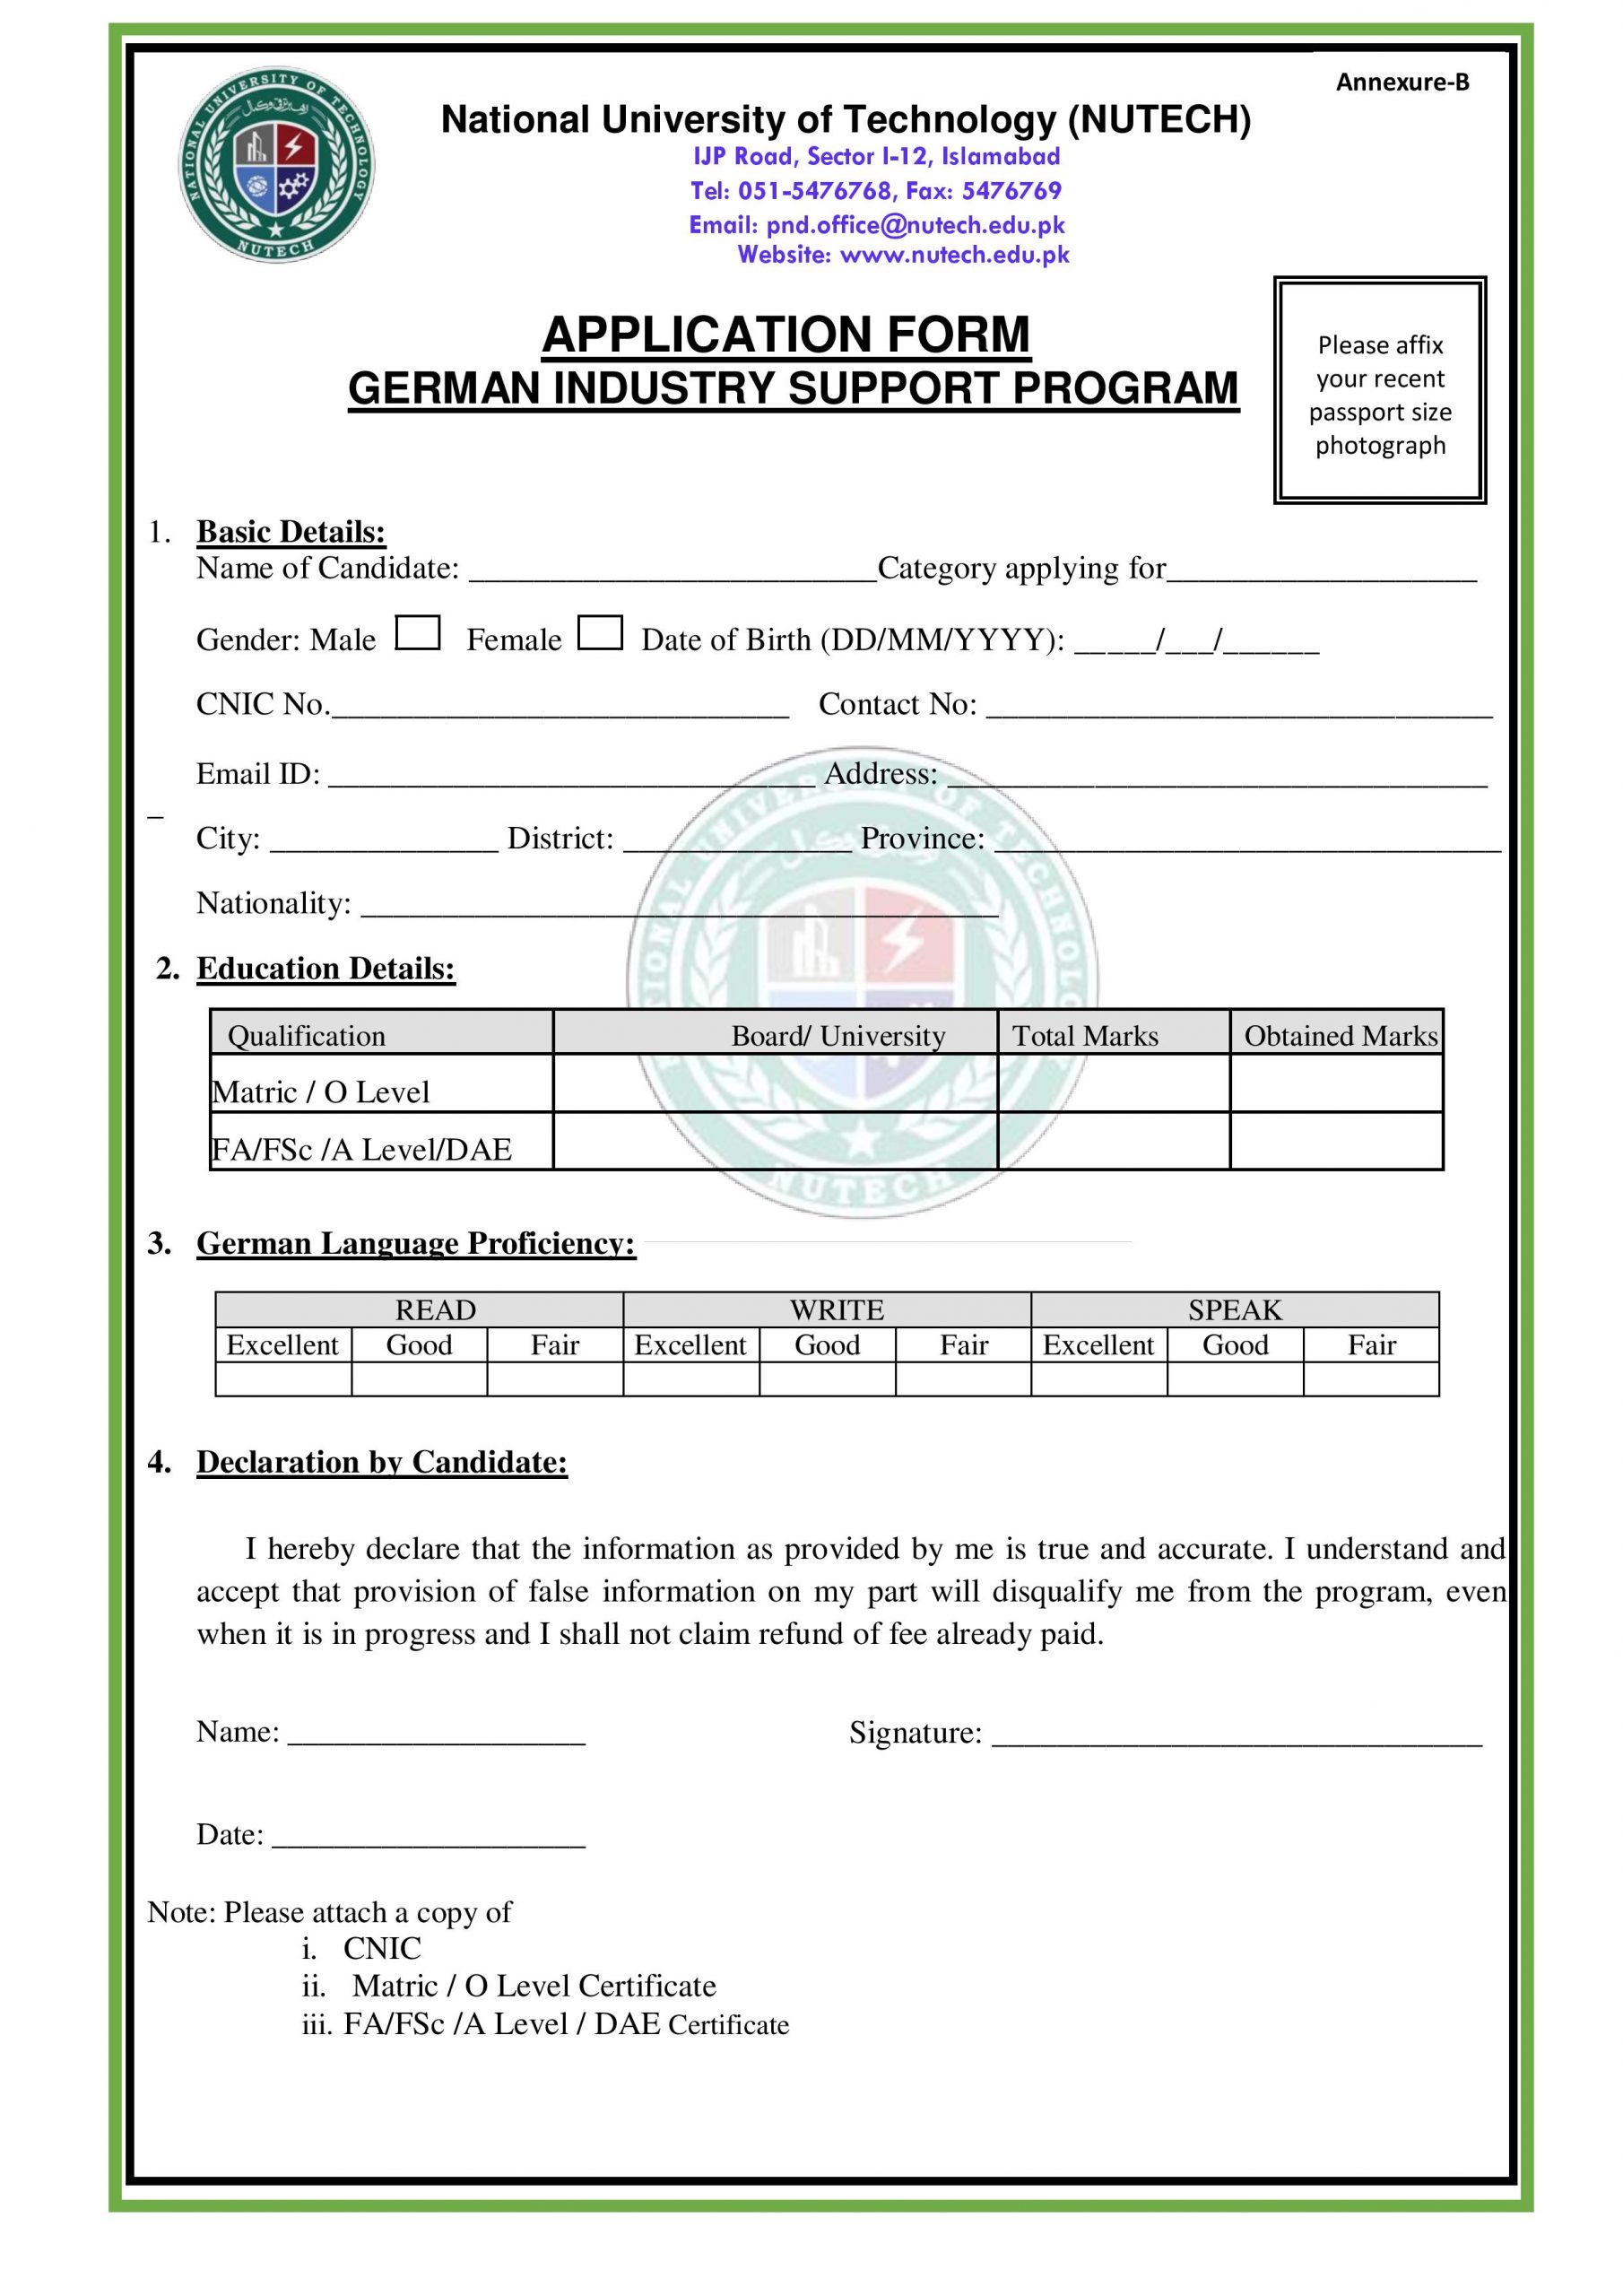 https://infoomni.com/wp-content/uploads/2019/12/CANDIDATE-APPLICATION-FORM-2019-Germany-page-001-scaled.jpg